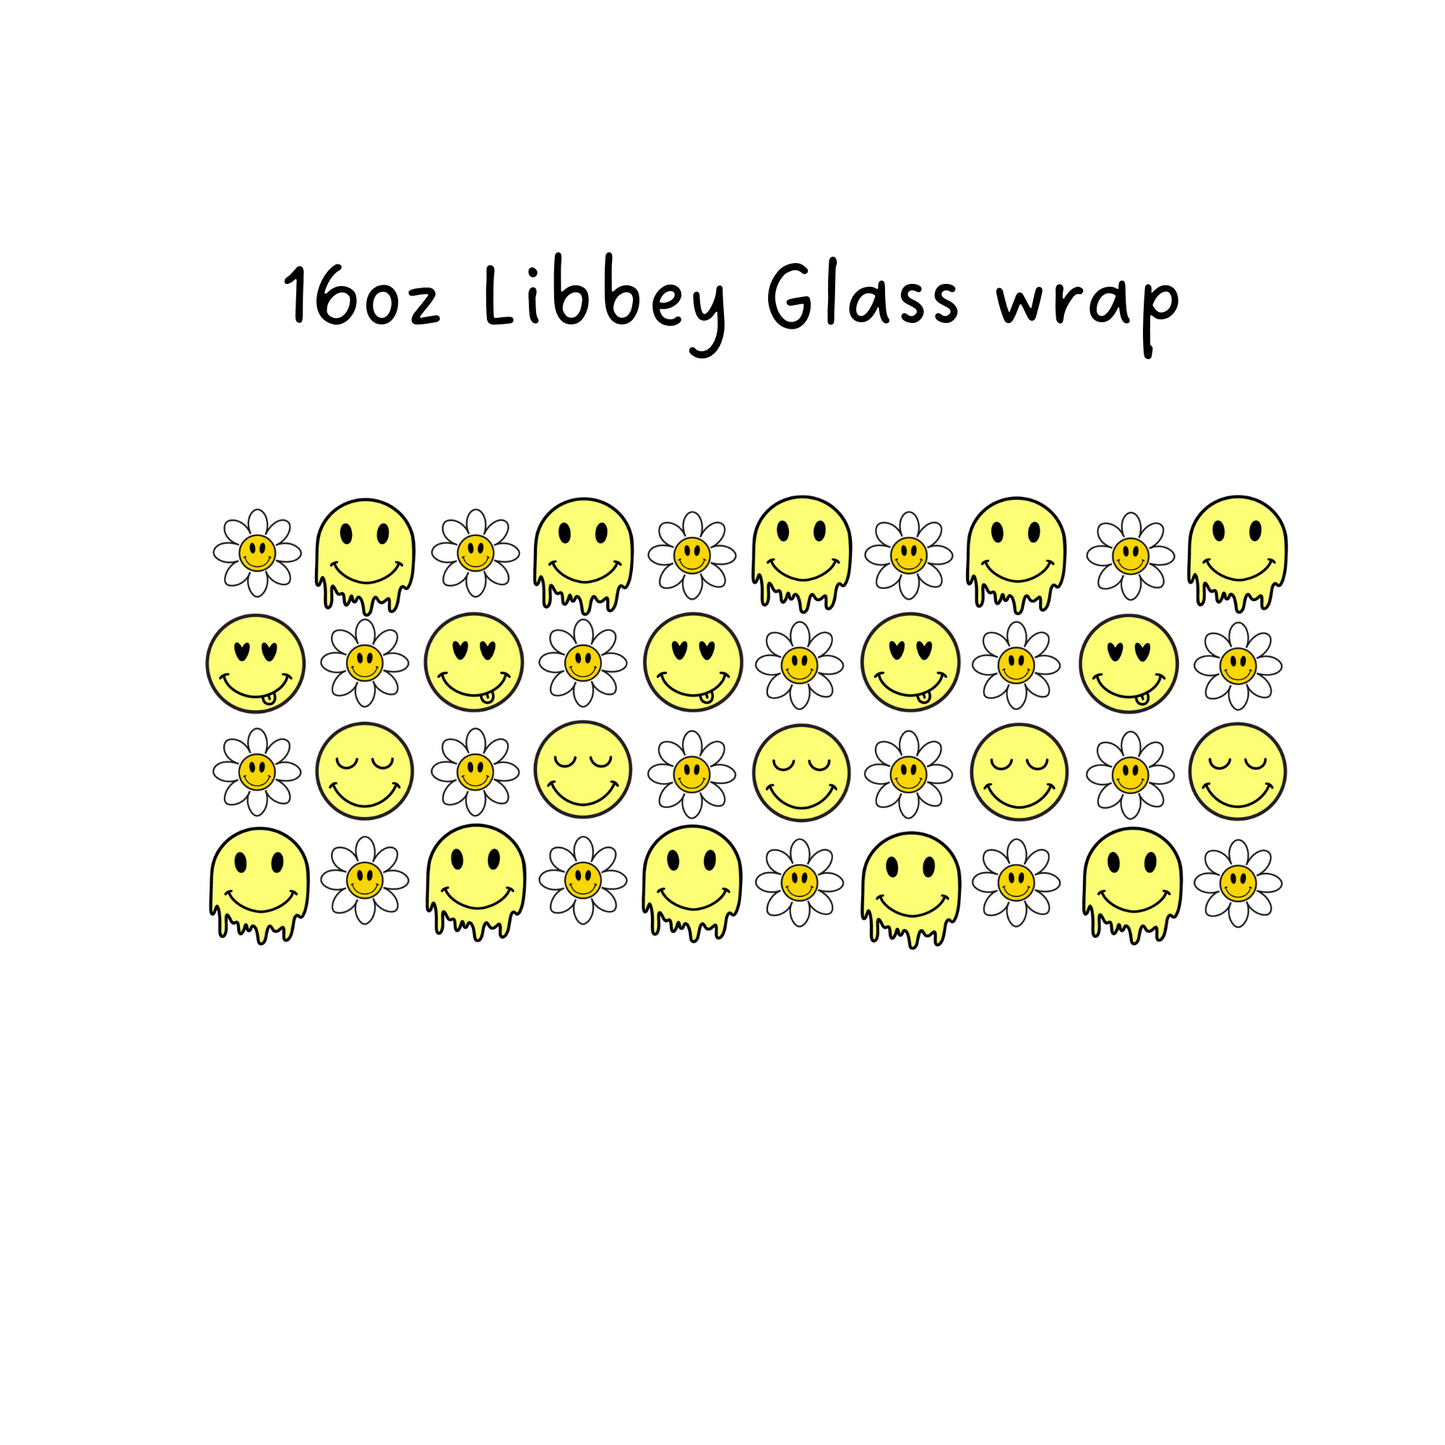 Dripping Smiley  16 Oz Libbey Beer Glass Wrap